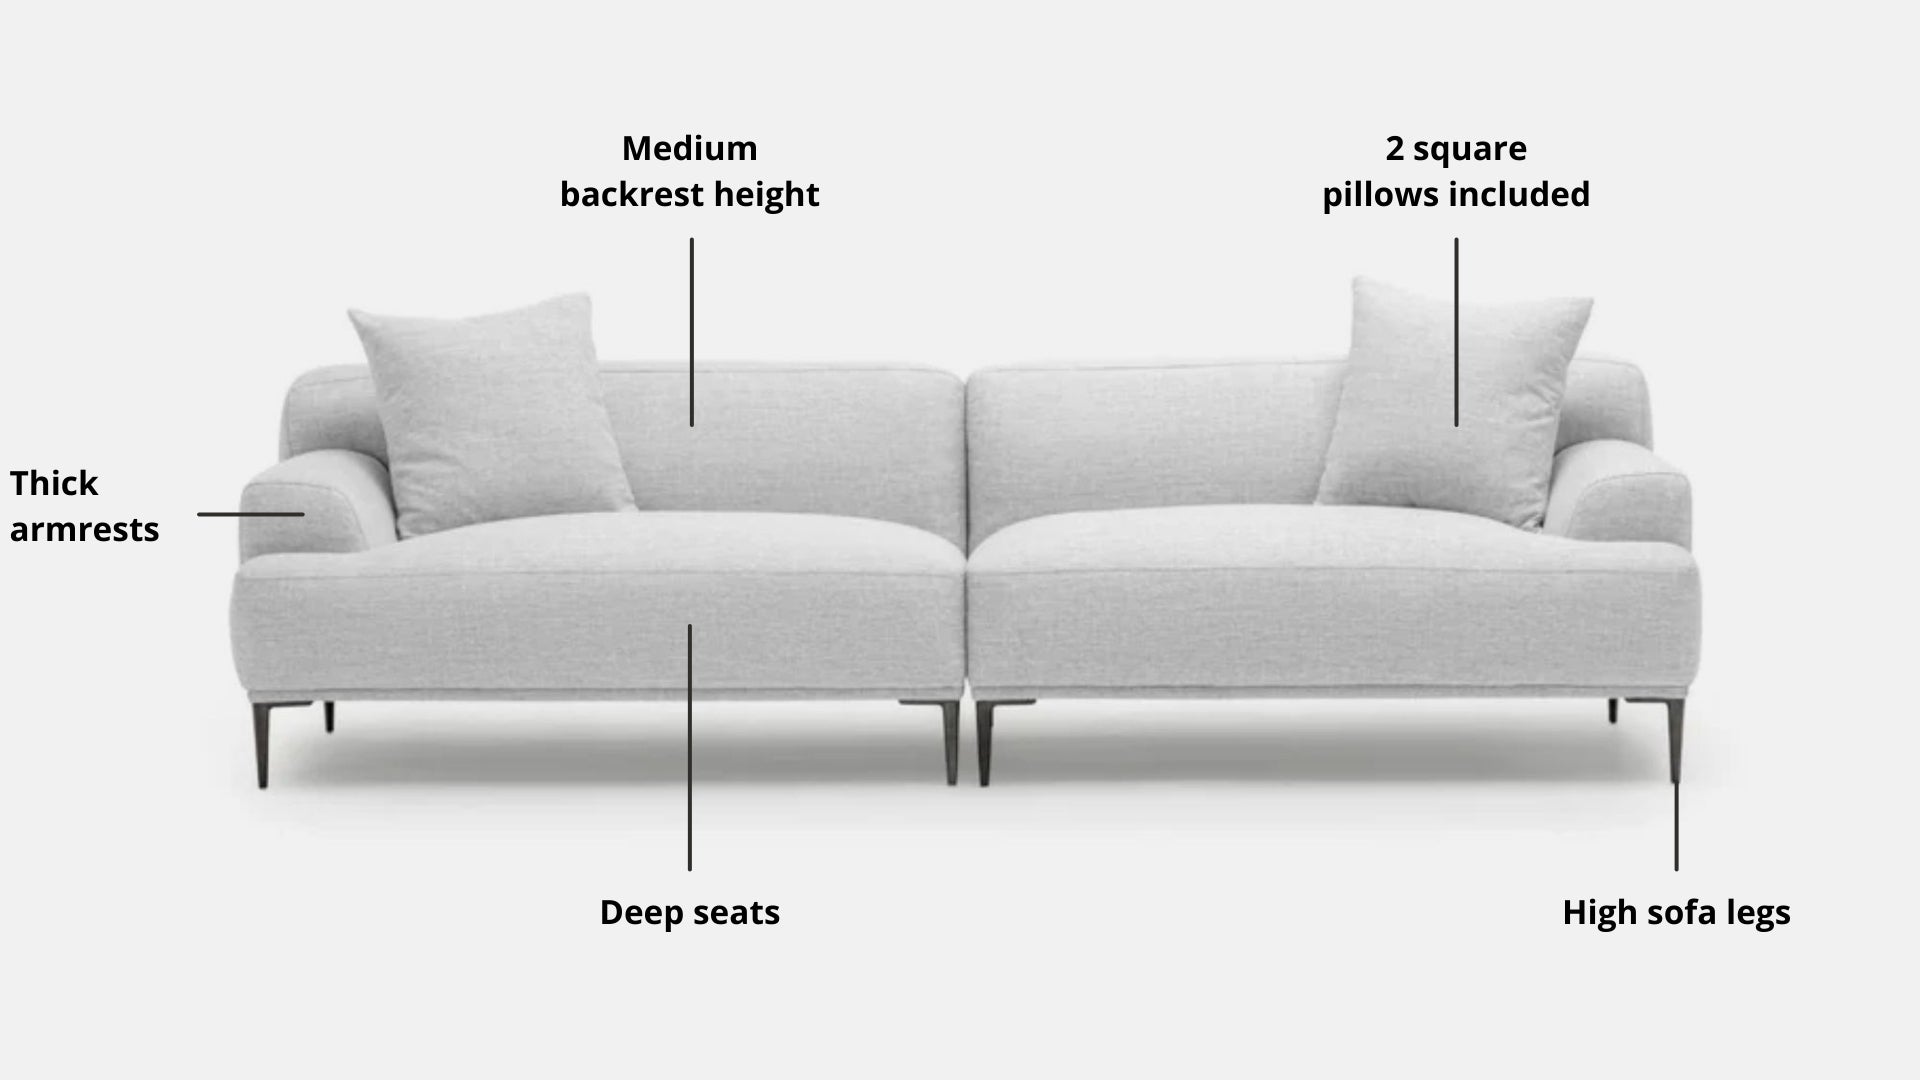 Key features such as armrest thickness, cushion height, seat depth and sofa leg height for Crystal Fabric Sofa